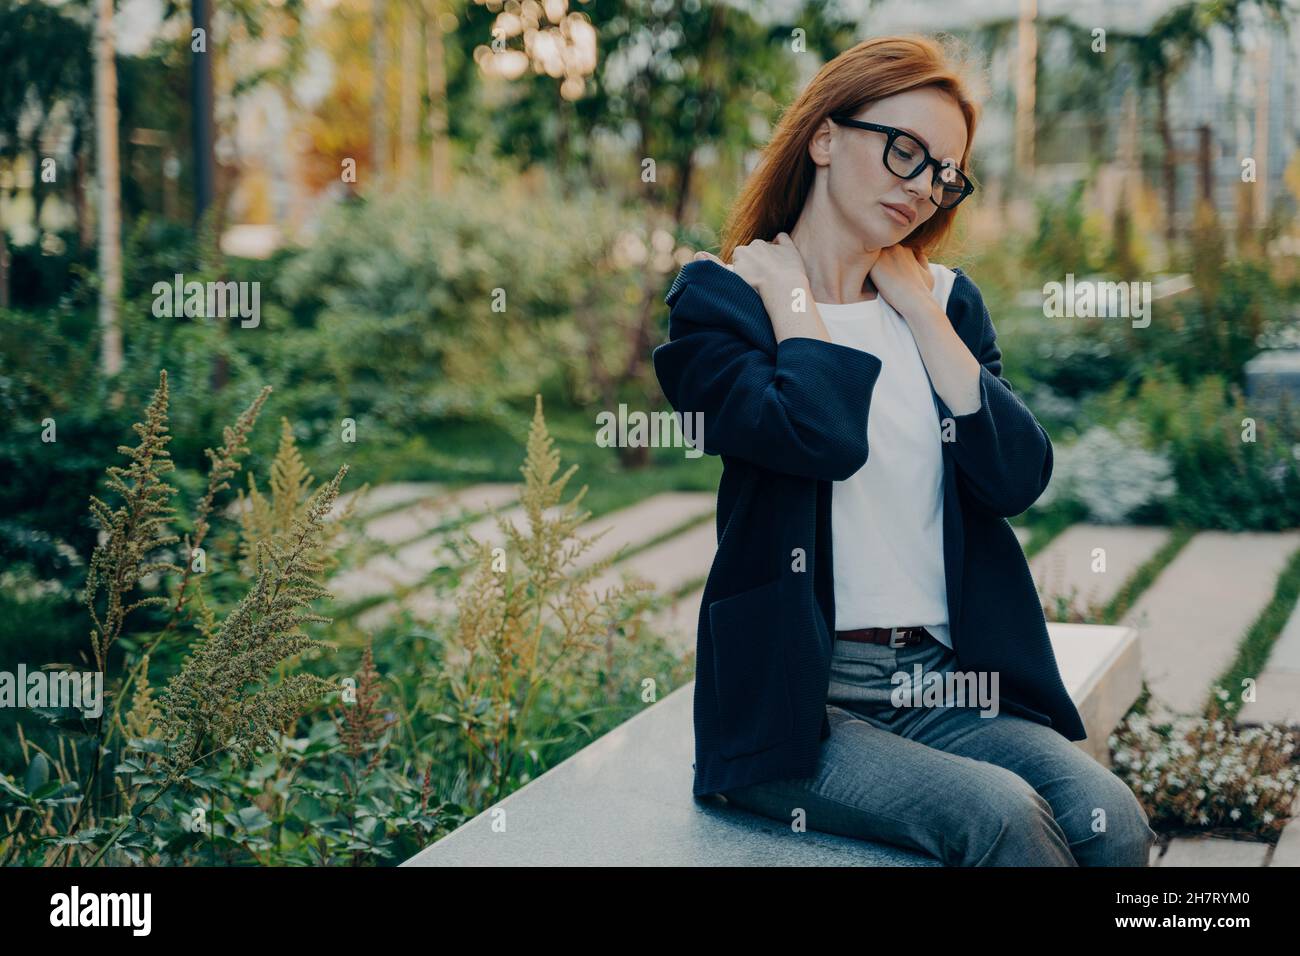 Outdoor shot of redhead woman has shoulder pain poses outdoor in park during daytime Stock Photo